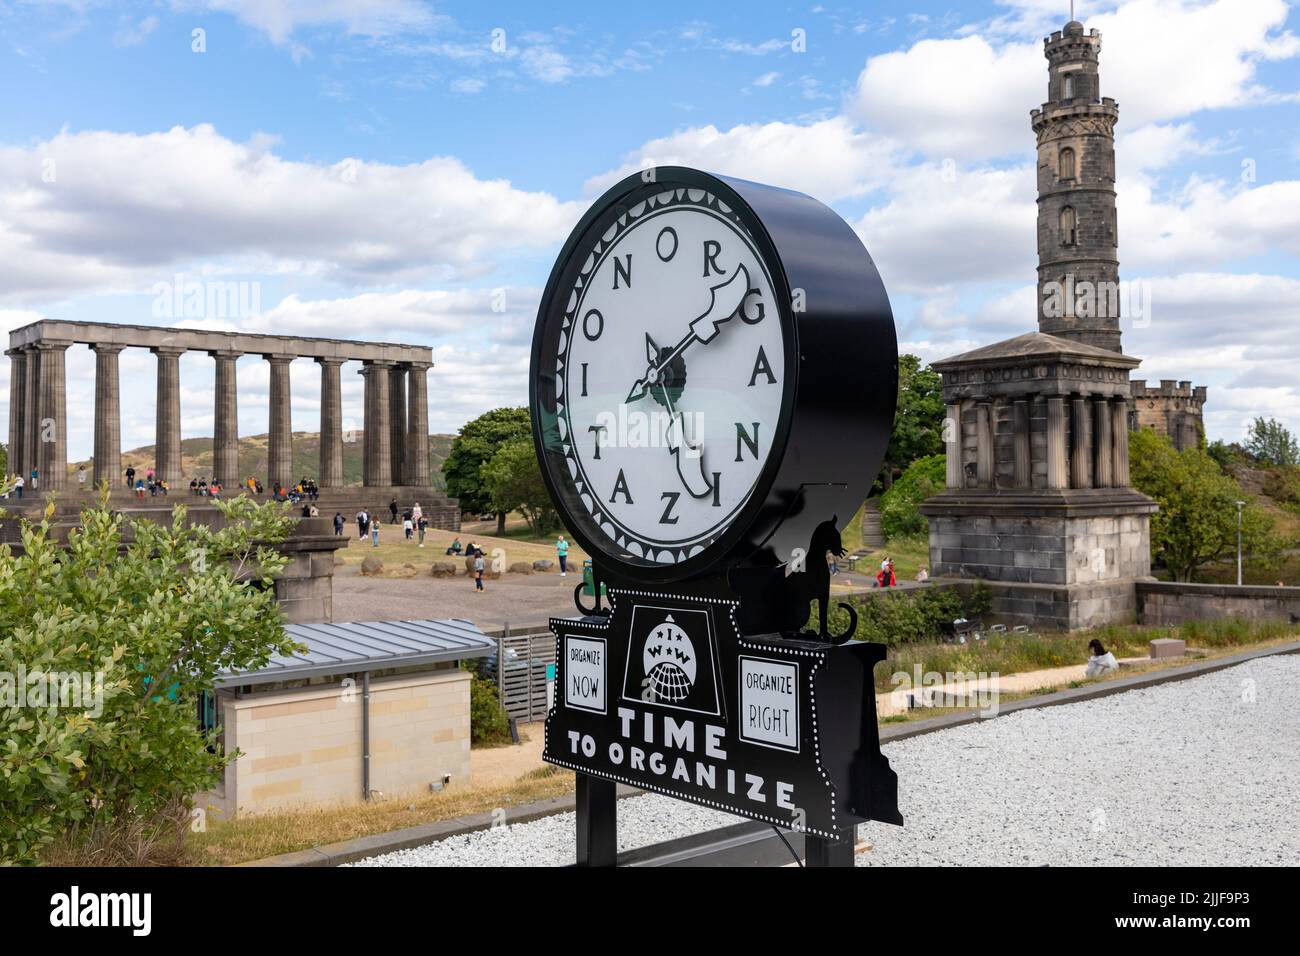 Calton Hill Edinburgh, Silent Agitator time to organise on display, Nelson Monument and the National Monument of Scotland behind,UK,Europe Stock Photo